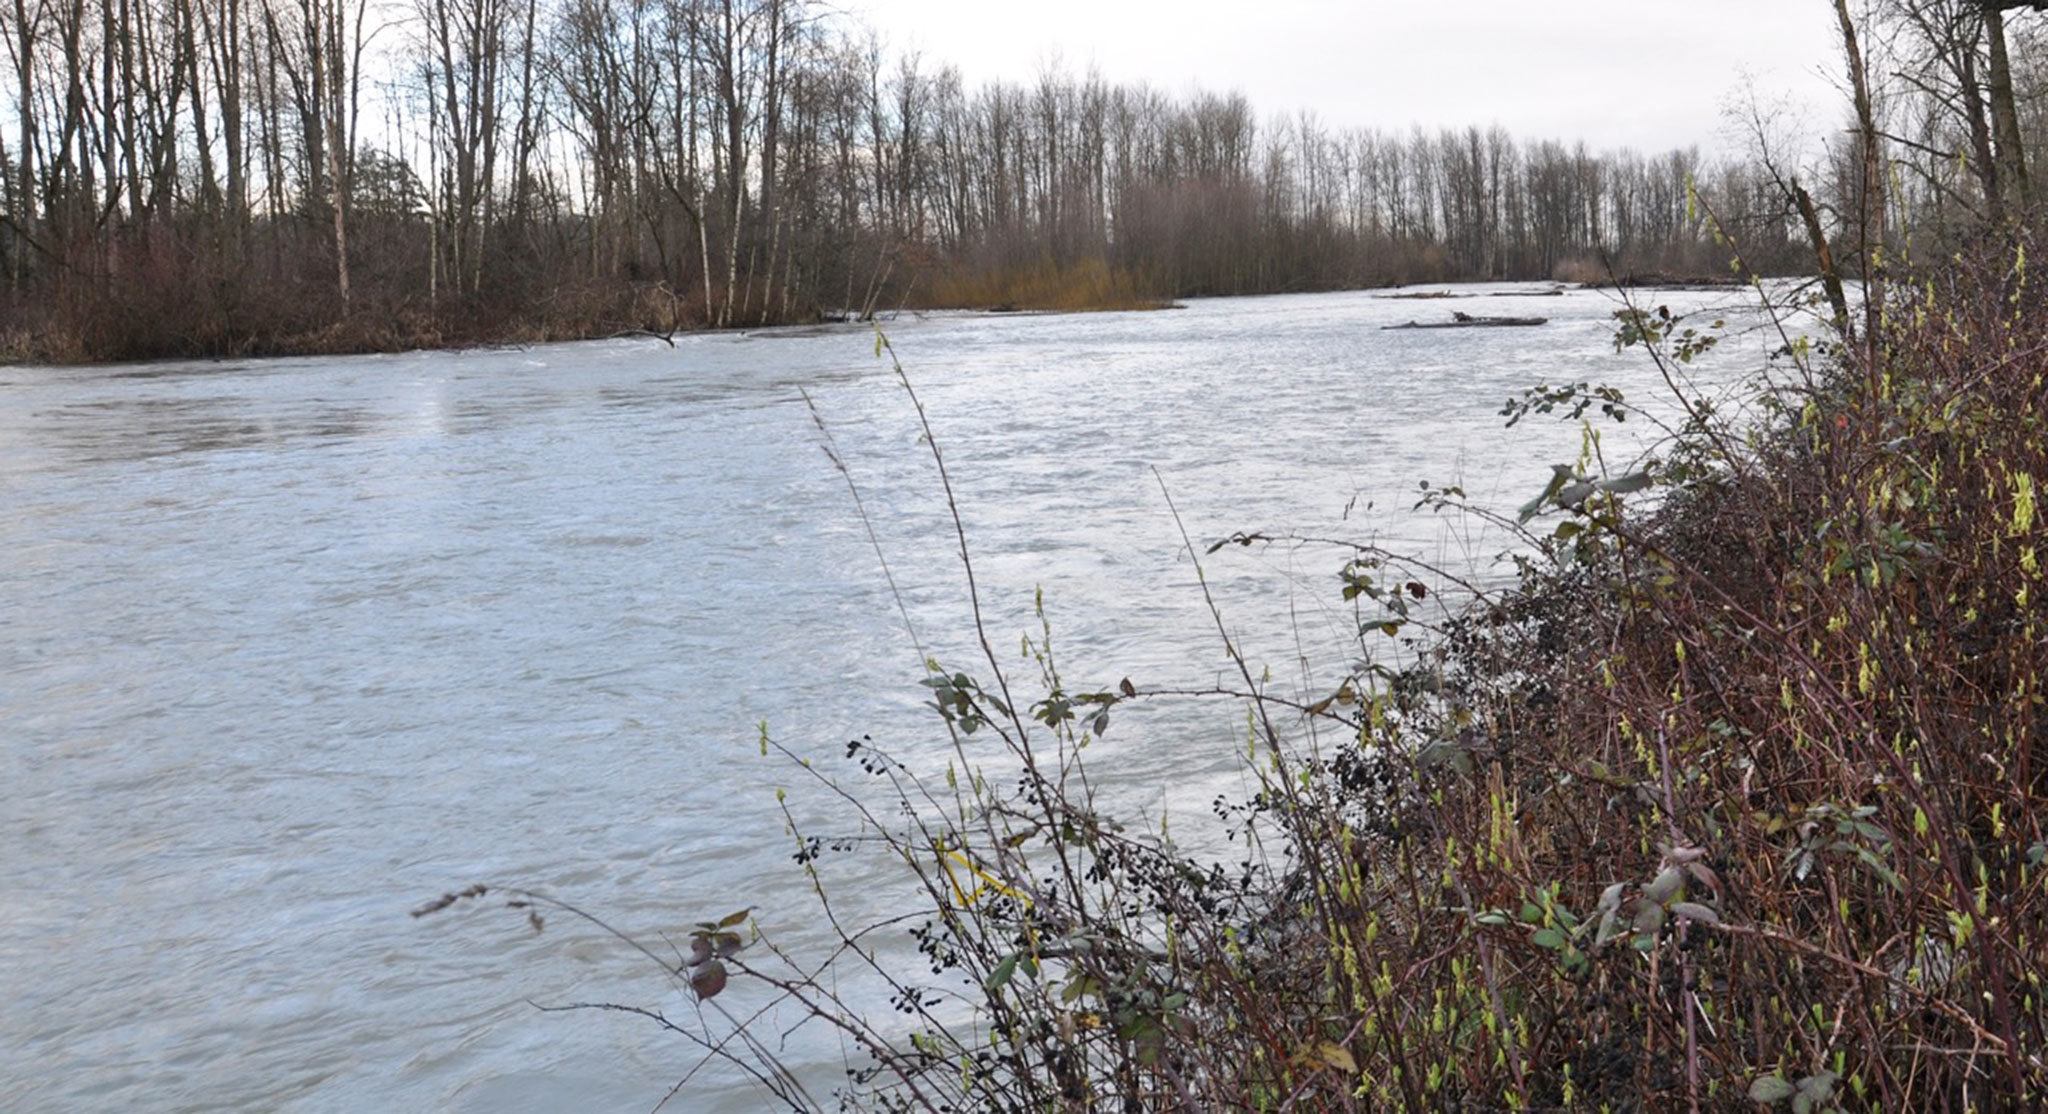 Whereas the White River could once handle flows of 6,000 to 8,000 cubic feet per second, infill that has come off the Emmons Glacier on Mount Rainier and silted up the river has turned even flows of 5,000 cubic feet per second into reasons to worry. RACHEL CIAMPI, Auburn Reporter